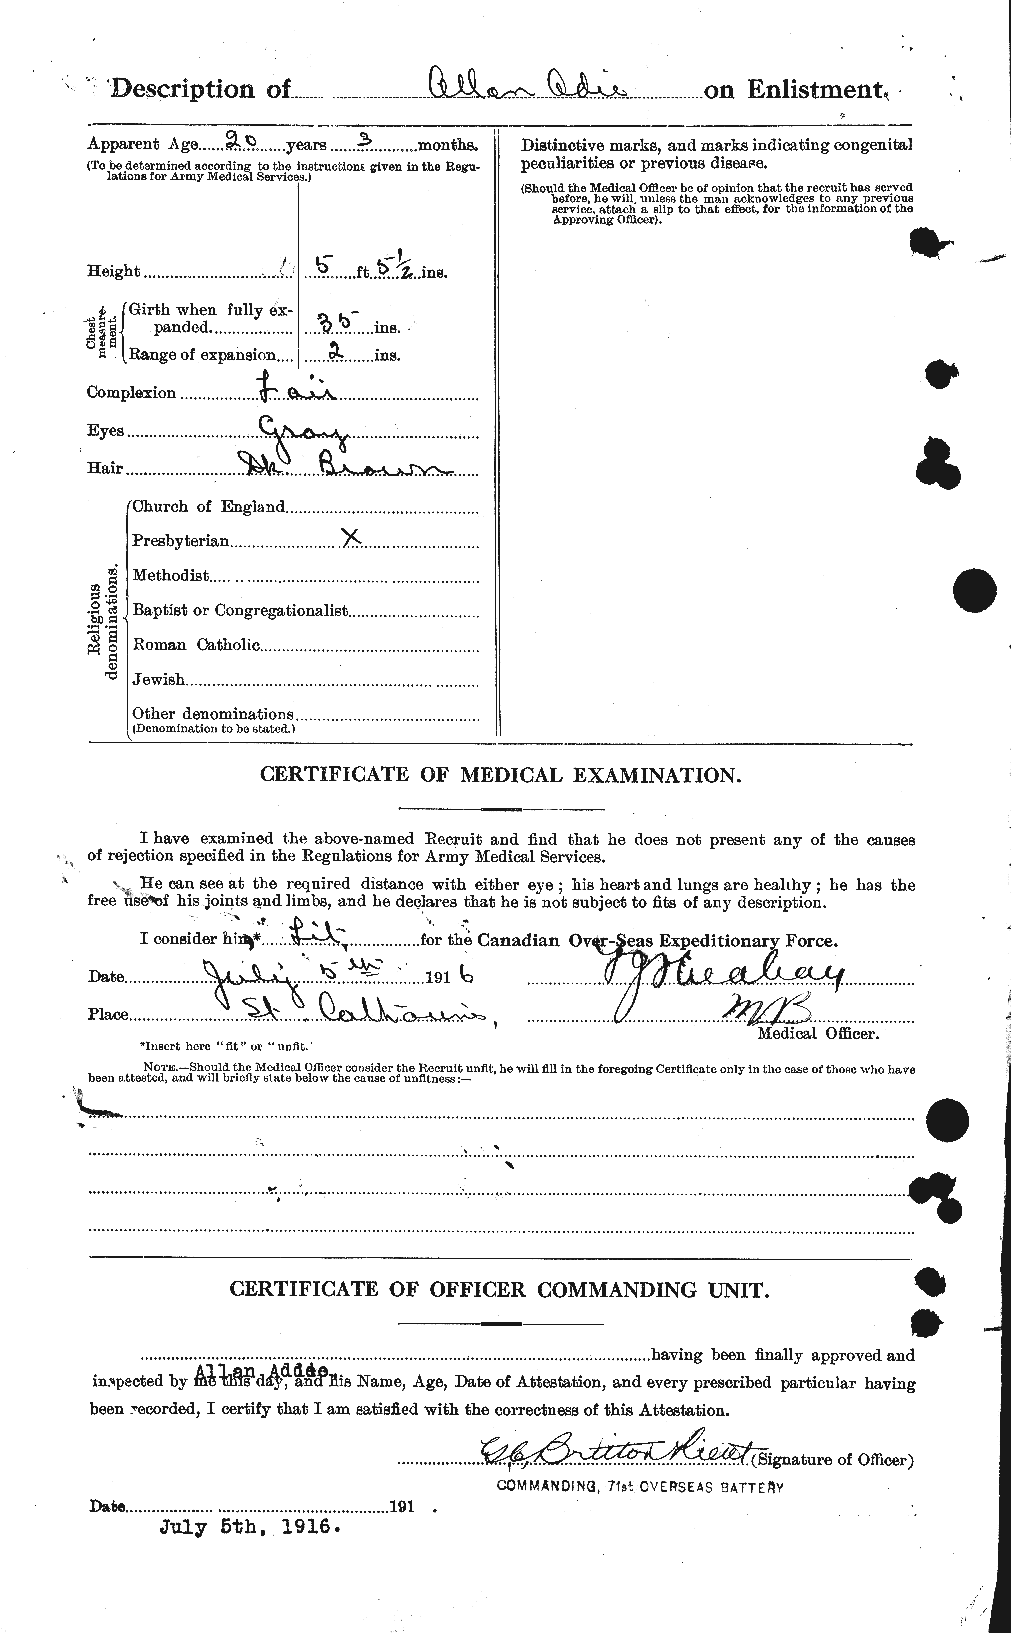 Personnel Records of the First World War - CEF 202810b